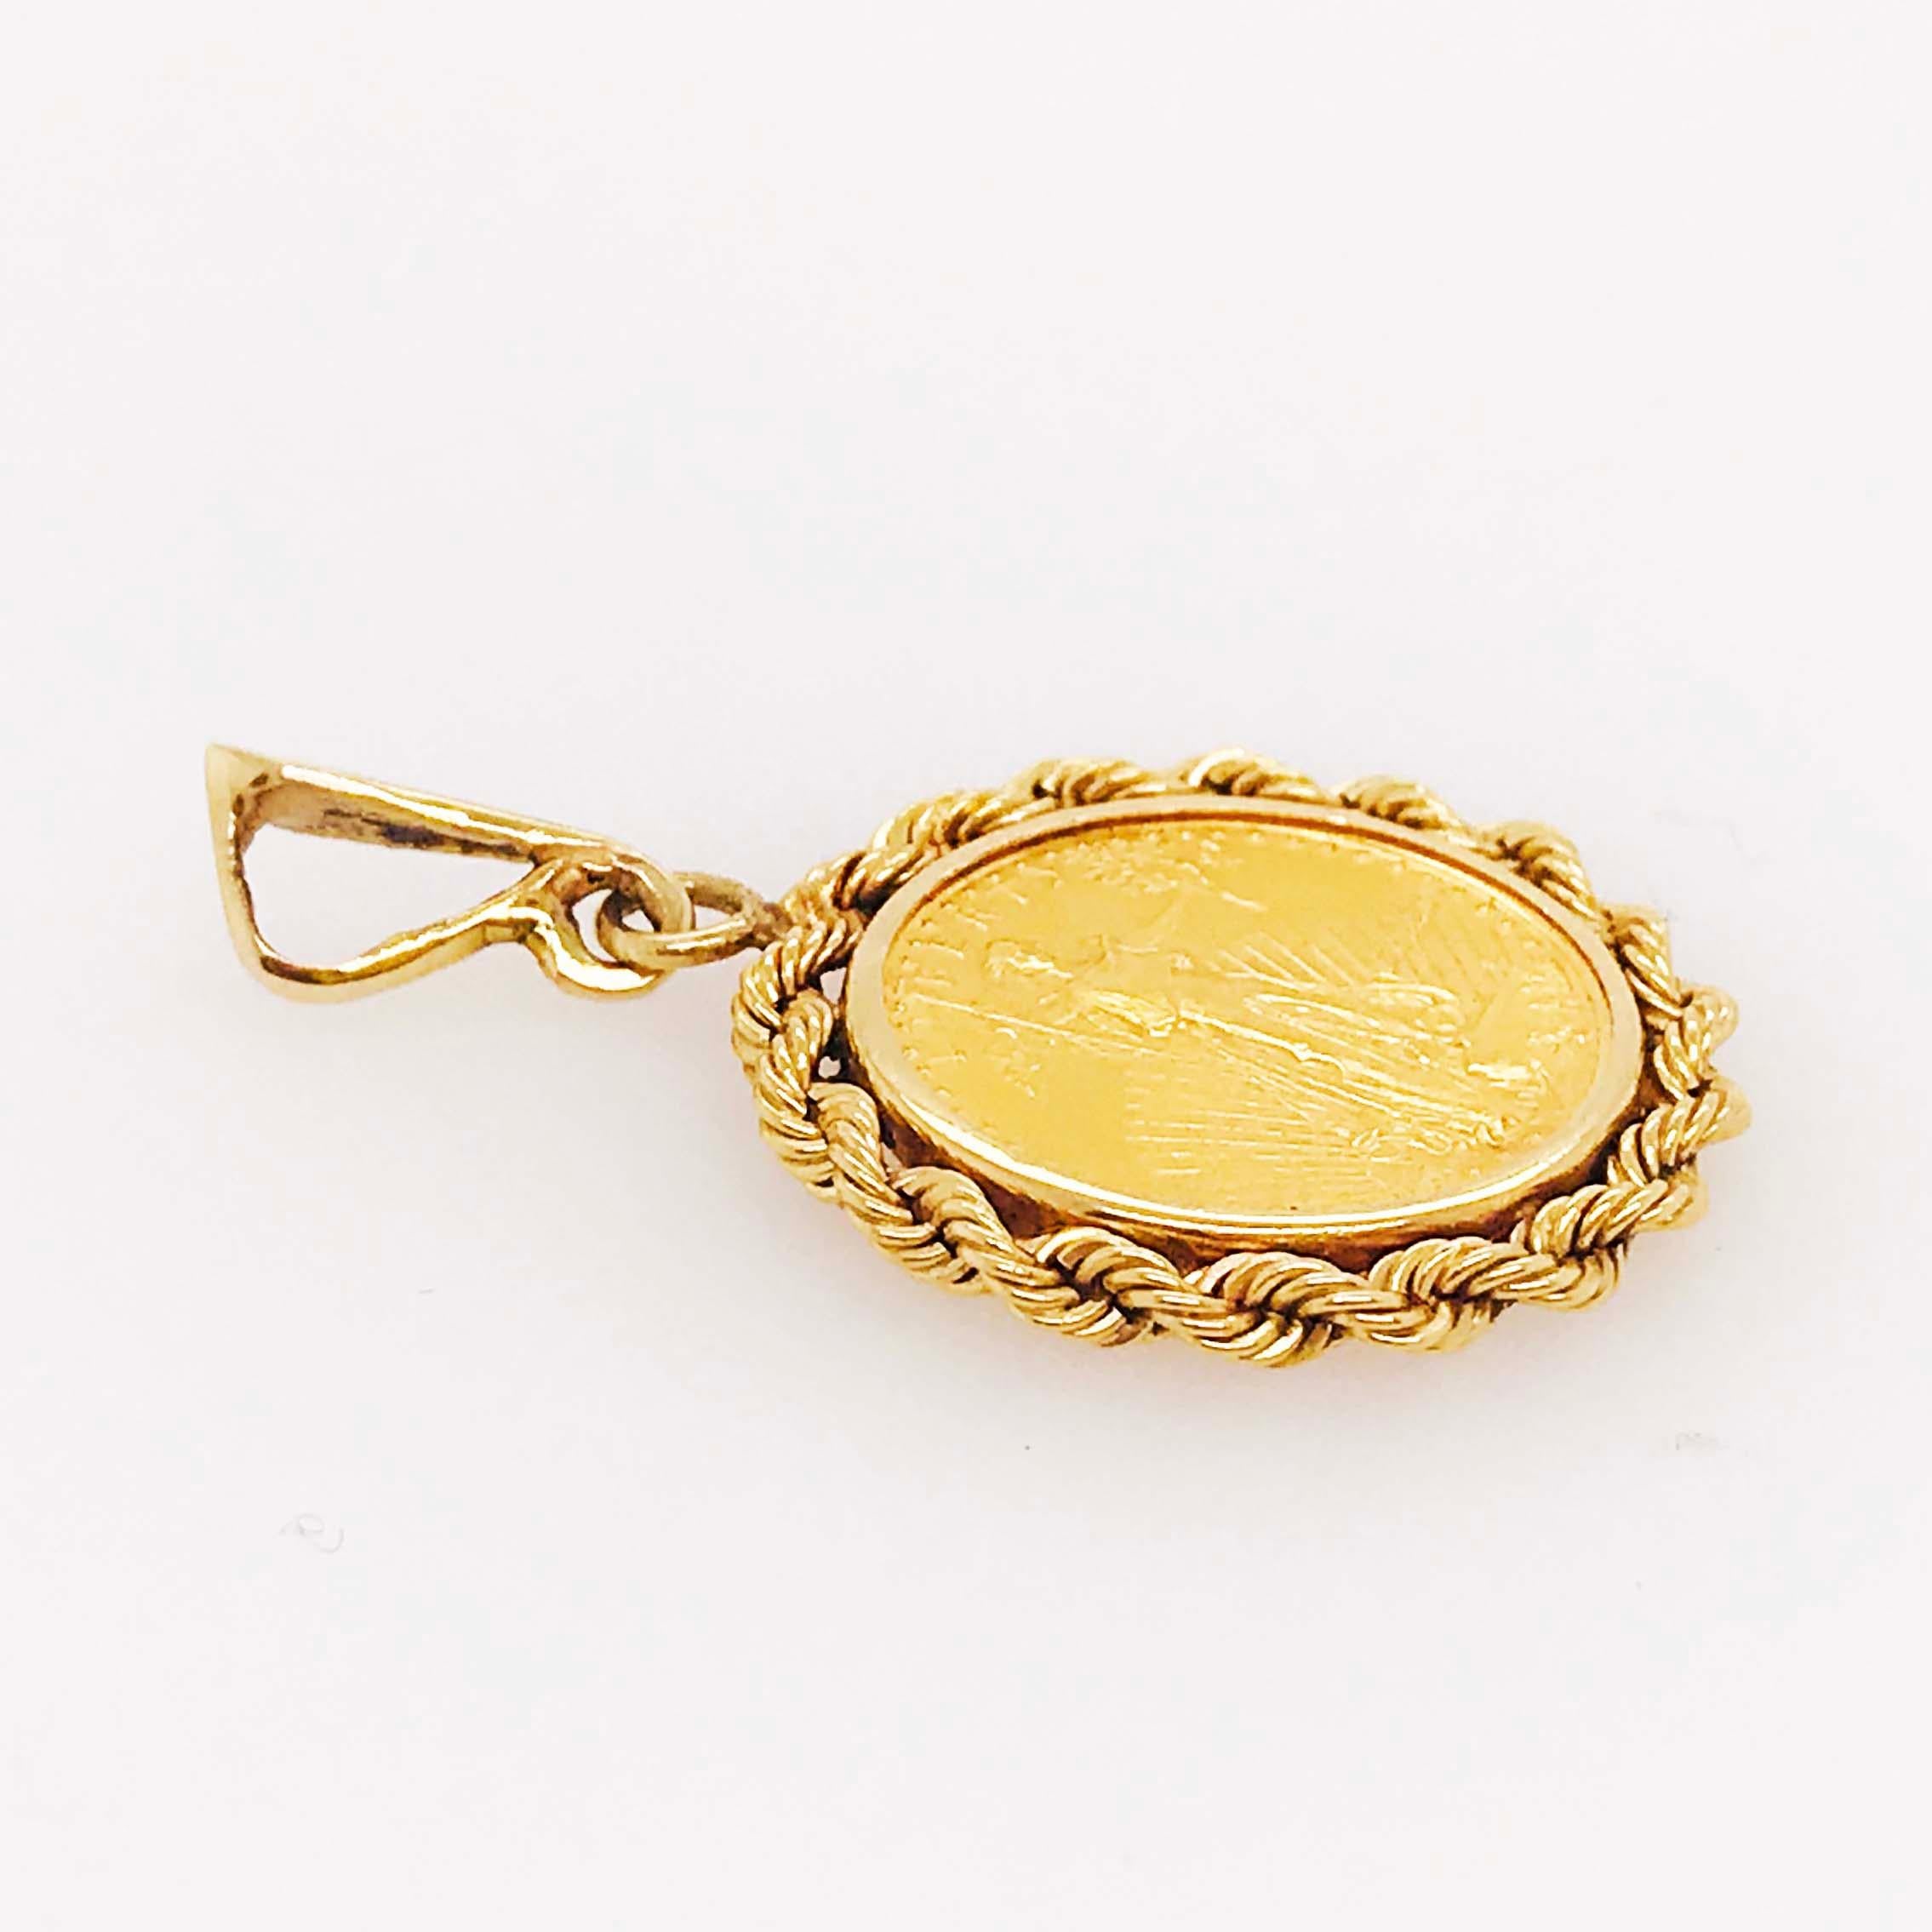 This is an authentic 22 Karat Gold American Eagle coin (or American Liberty Gold Coin) set in a 14k yellow gold rope coin bezel. The 1991 American Eagle coin has a round 14k yellow gold rope coin bezel. The pendant has a large bail to fit up to a